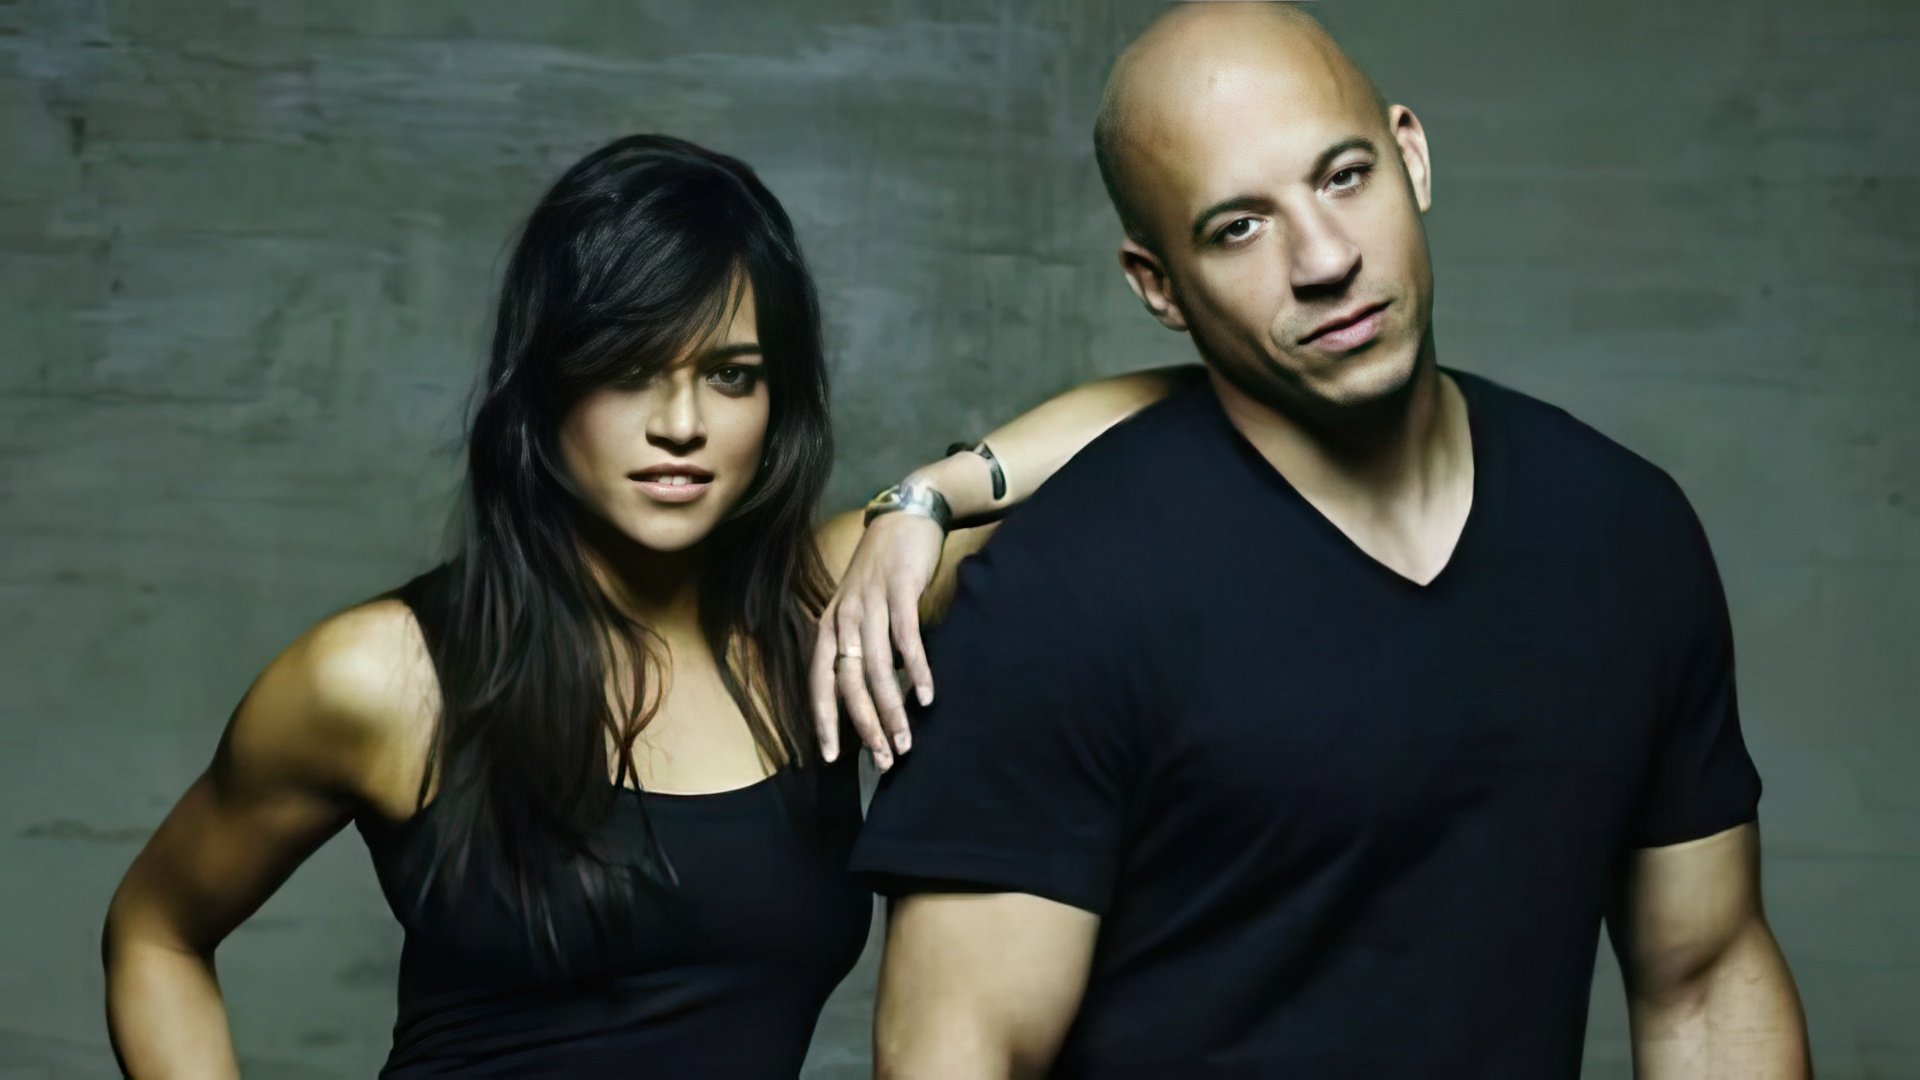 The romance between Vin Diesel and Michelle Rodriguez began on the set